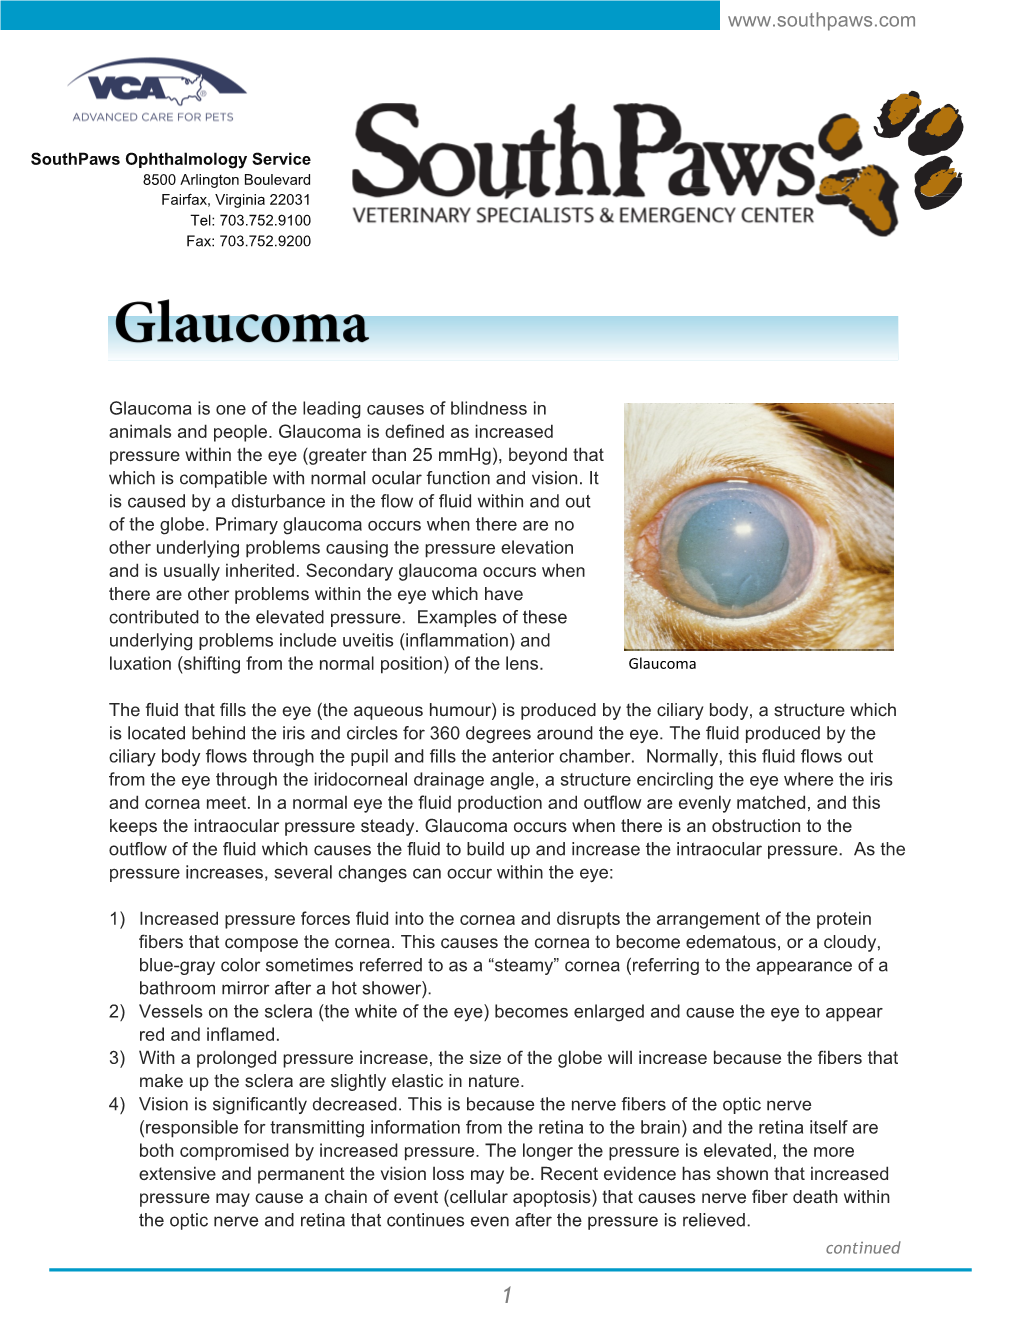 Glaucoma Is One of the Leading Causes of Blindness in Animals and People